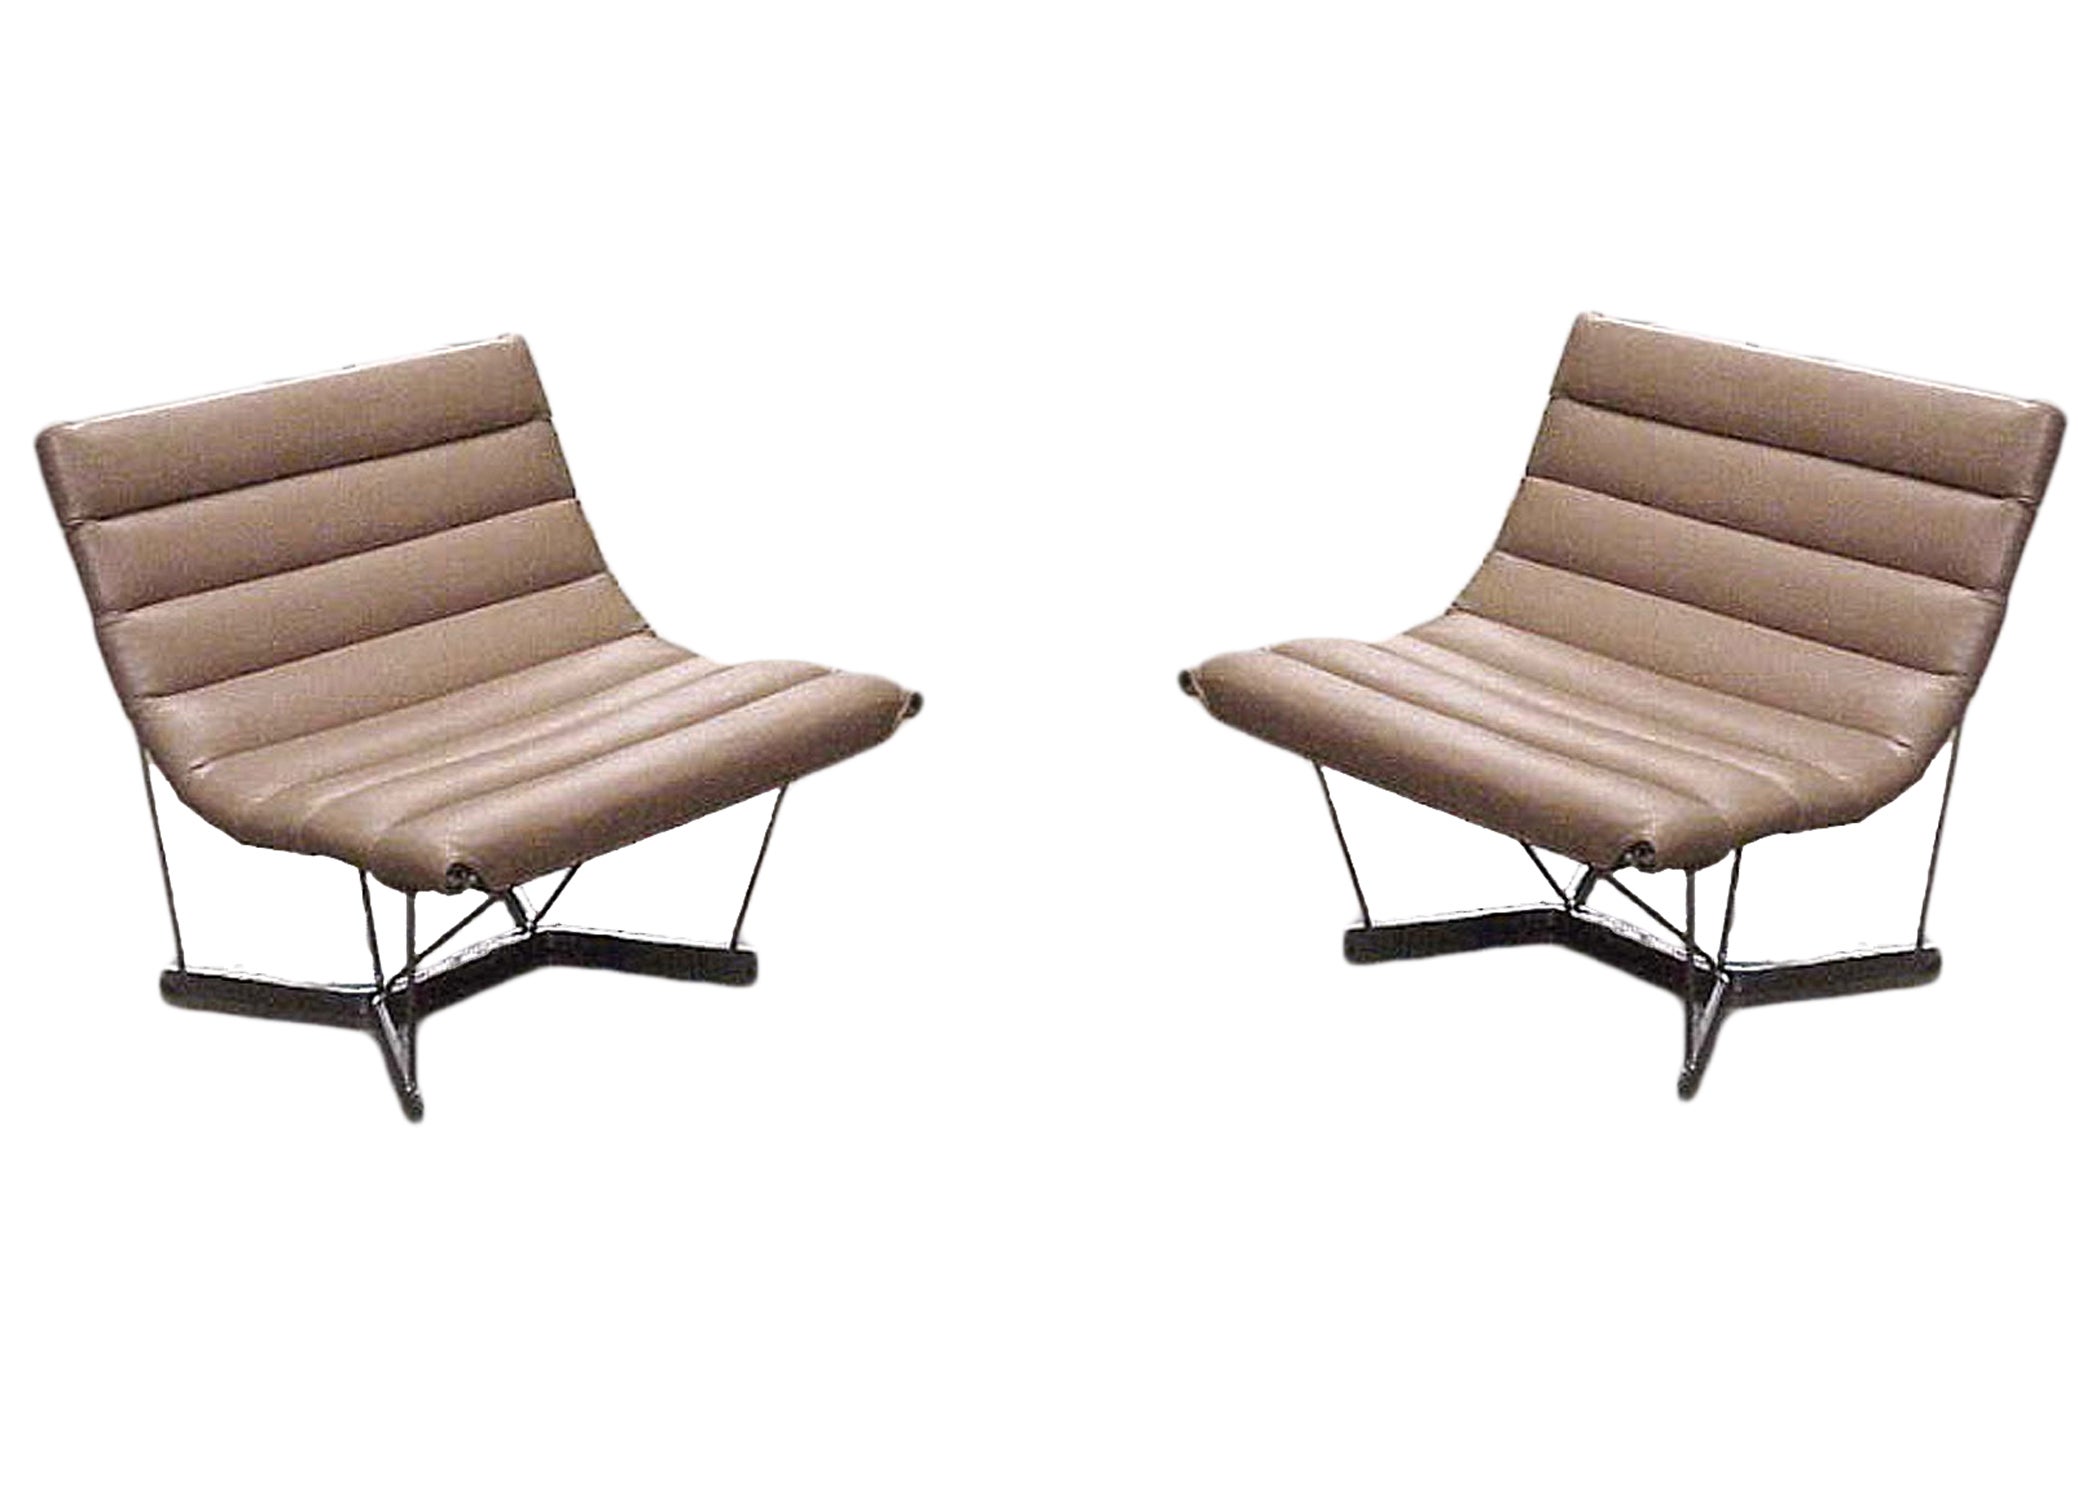 George Nelson Catenary Chairs for Herman Miller, Pair